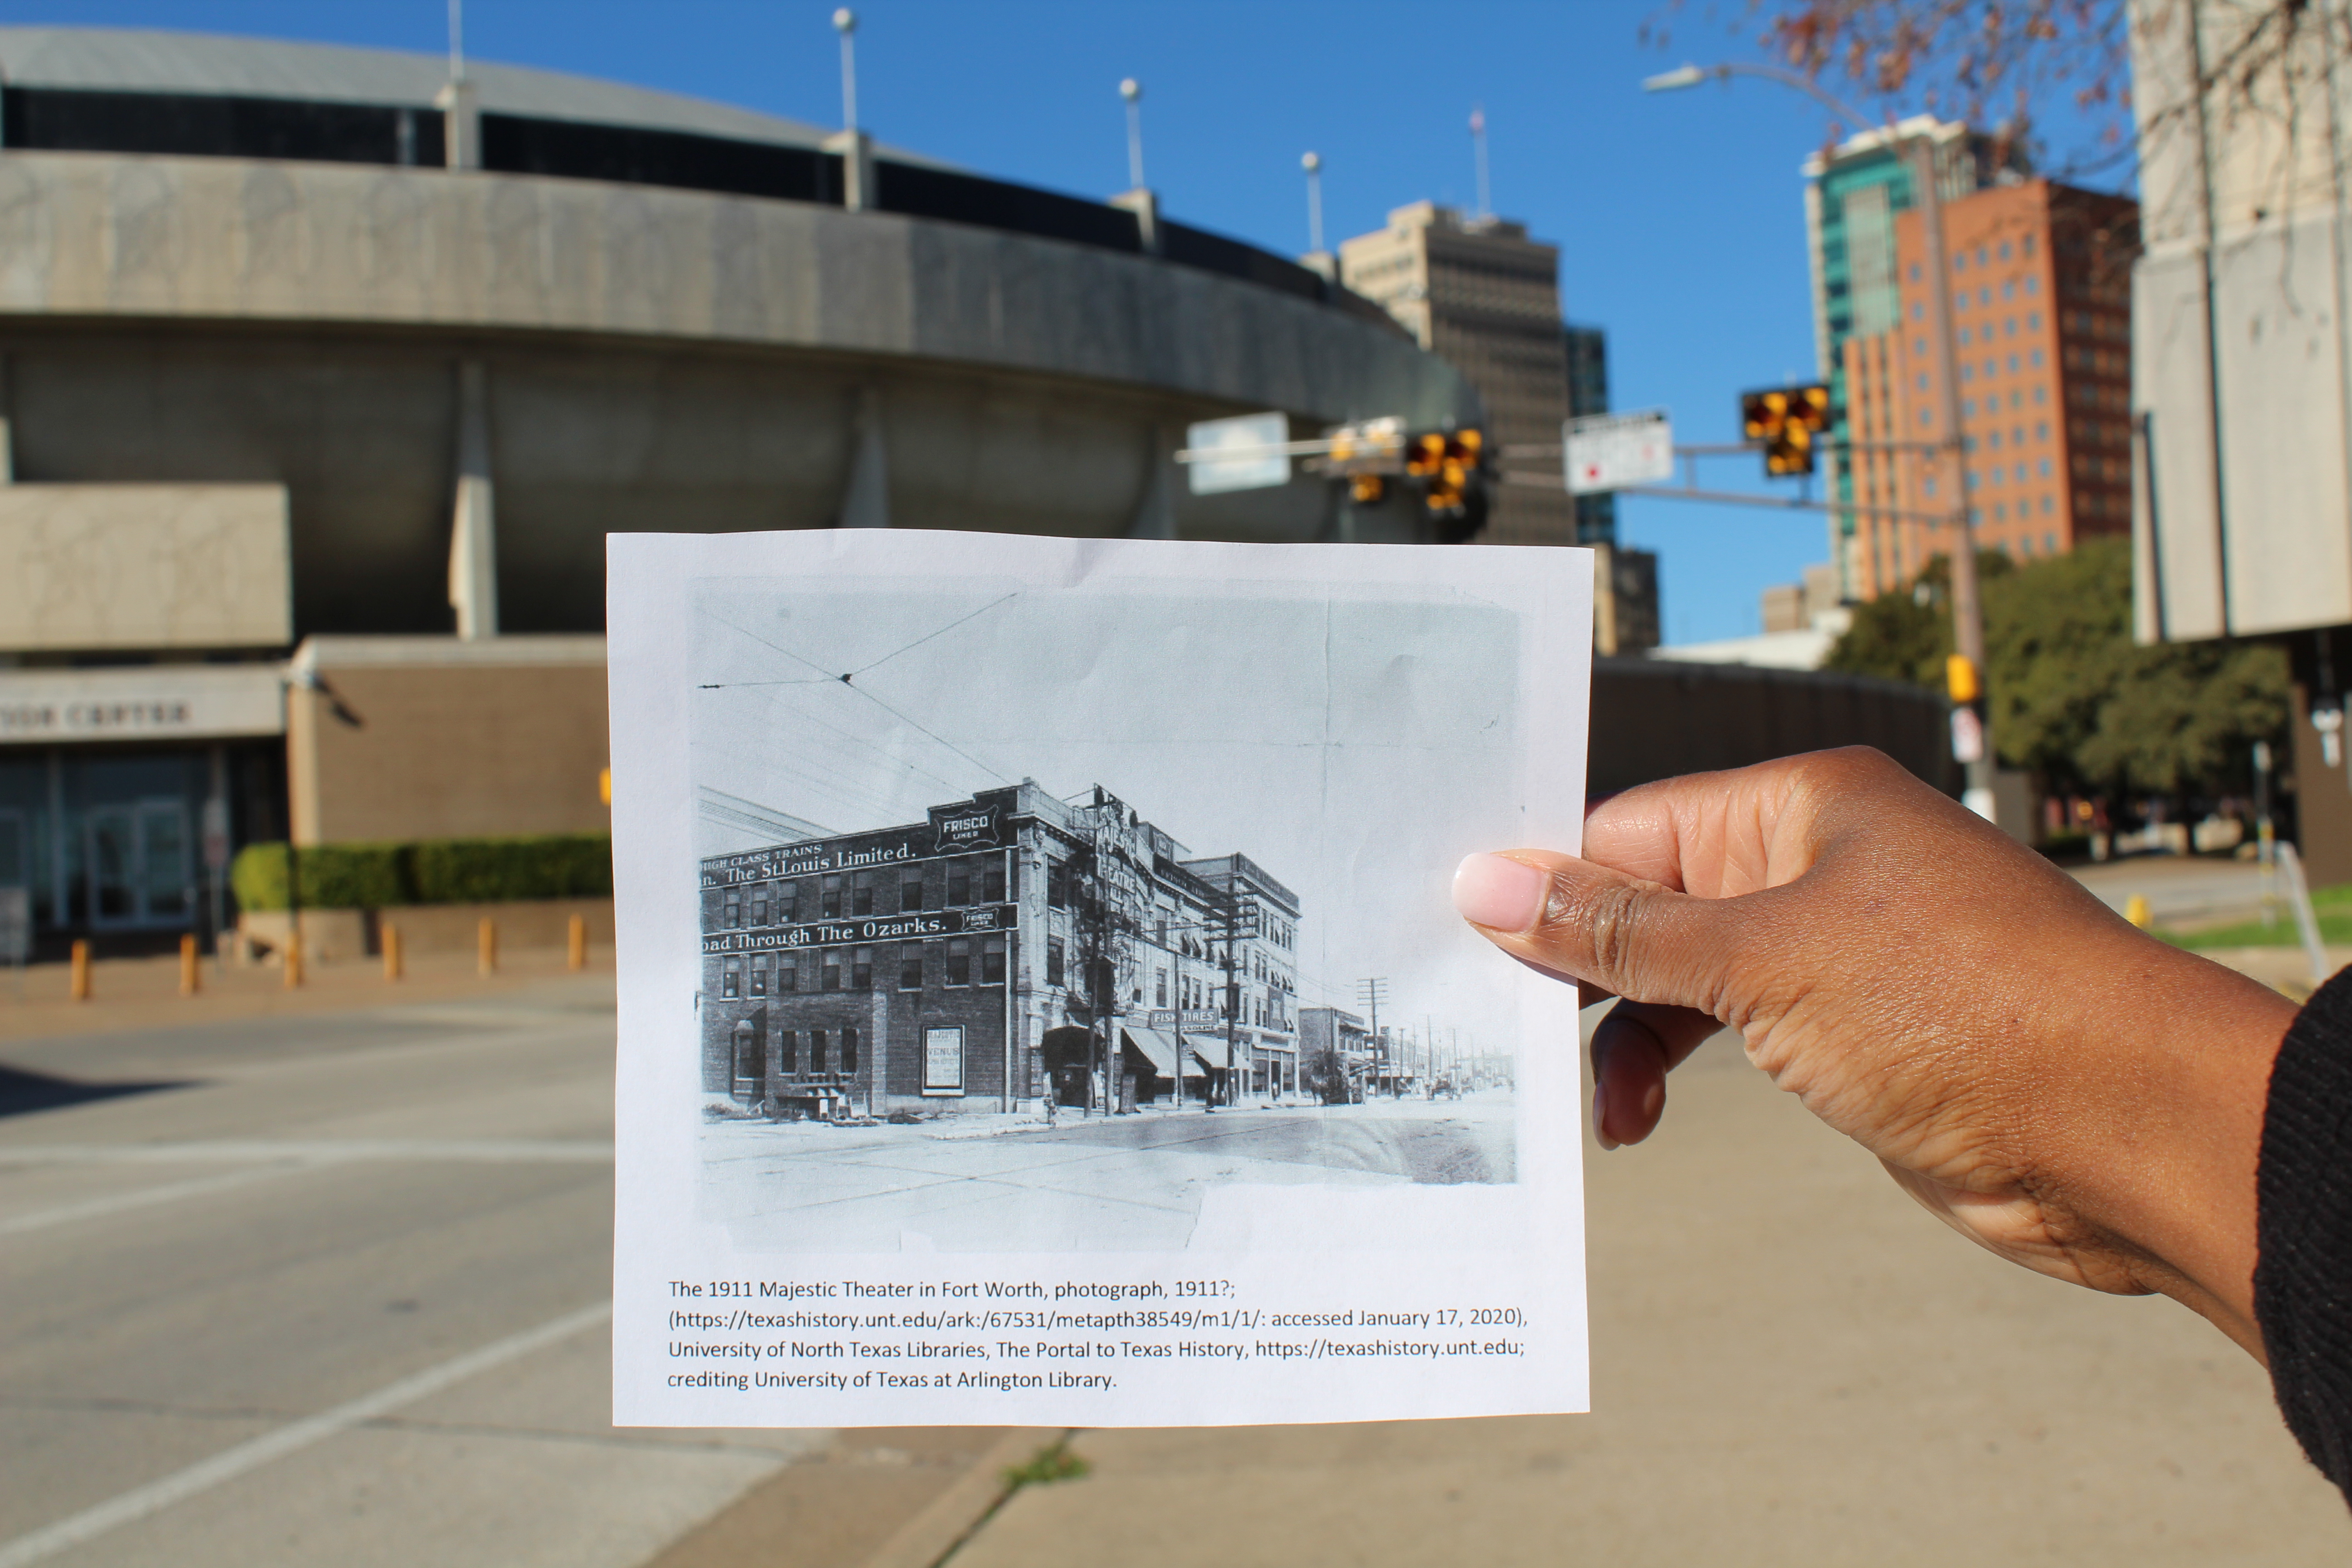 Former location of the Majestic Theater, which once stood at 1101 Commerce Street in Fort Worth, Texas.